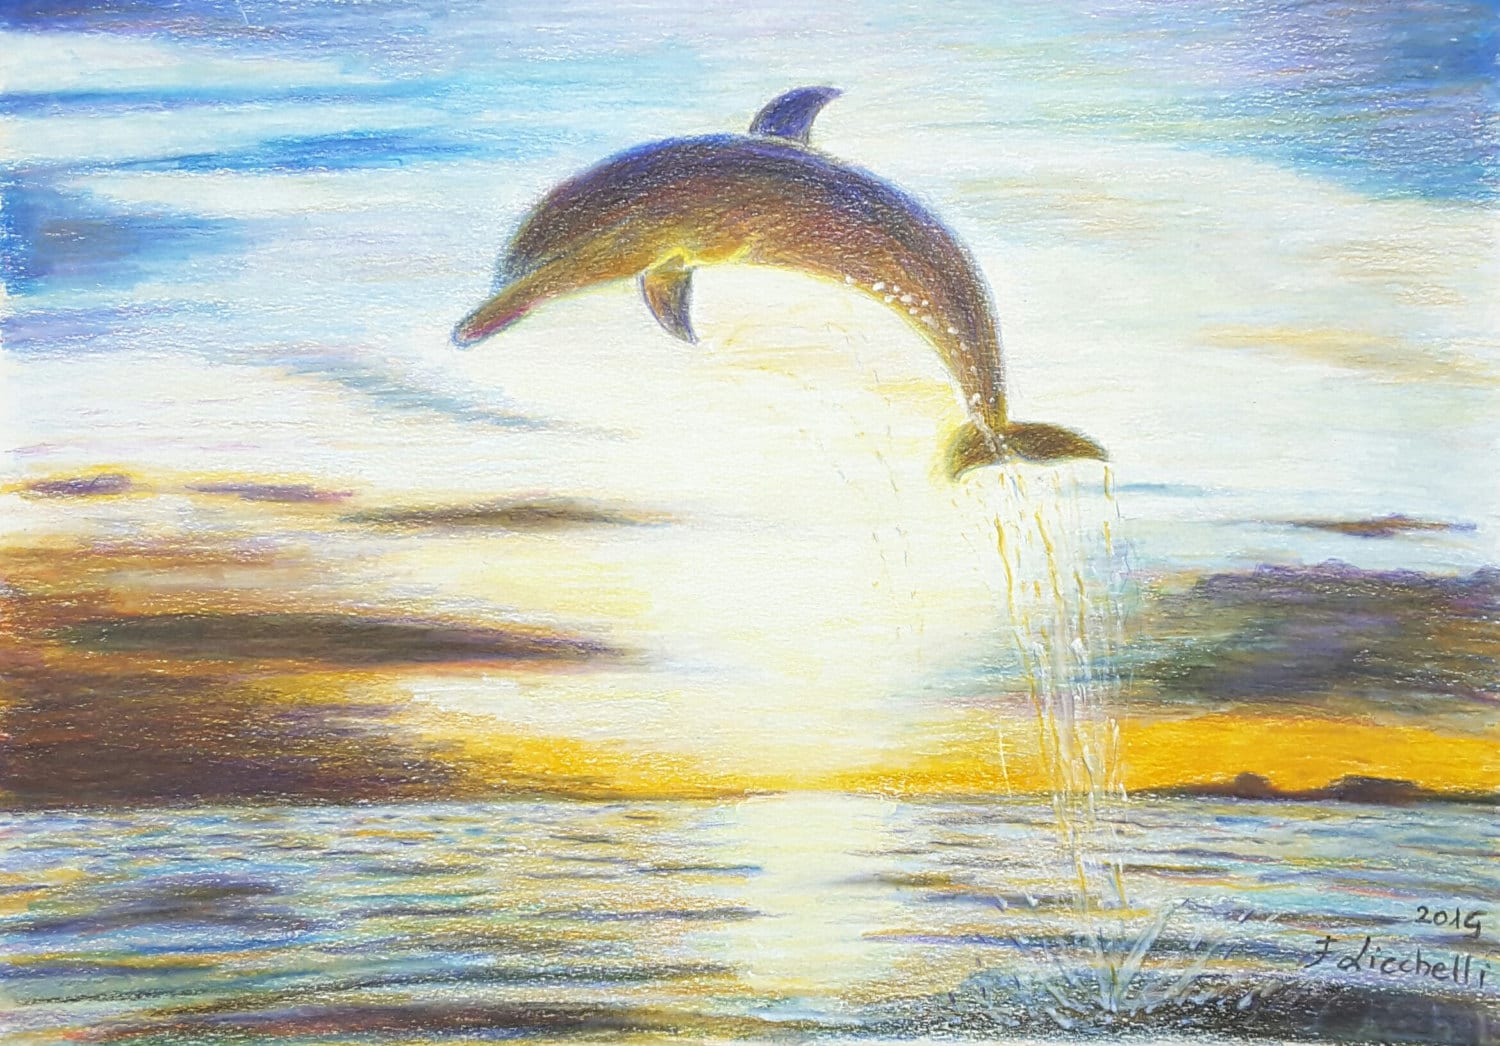 Dolphin Sketches - DolphinLeap.com